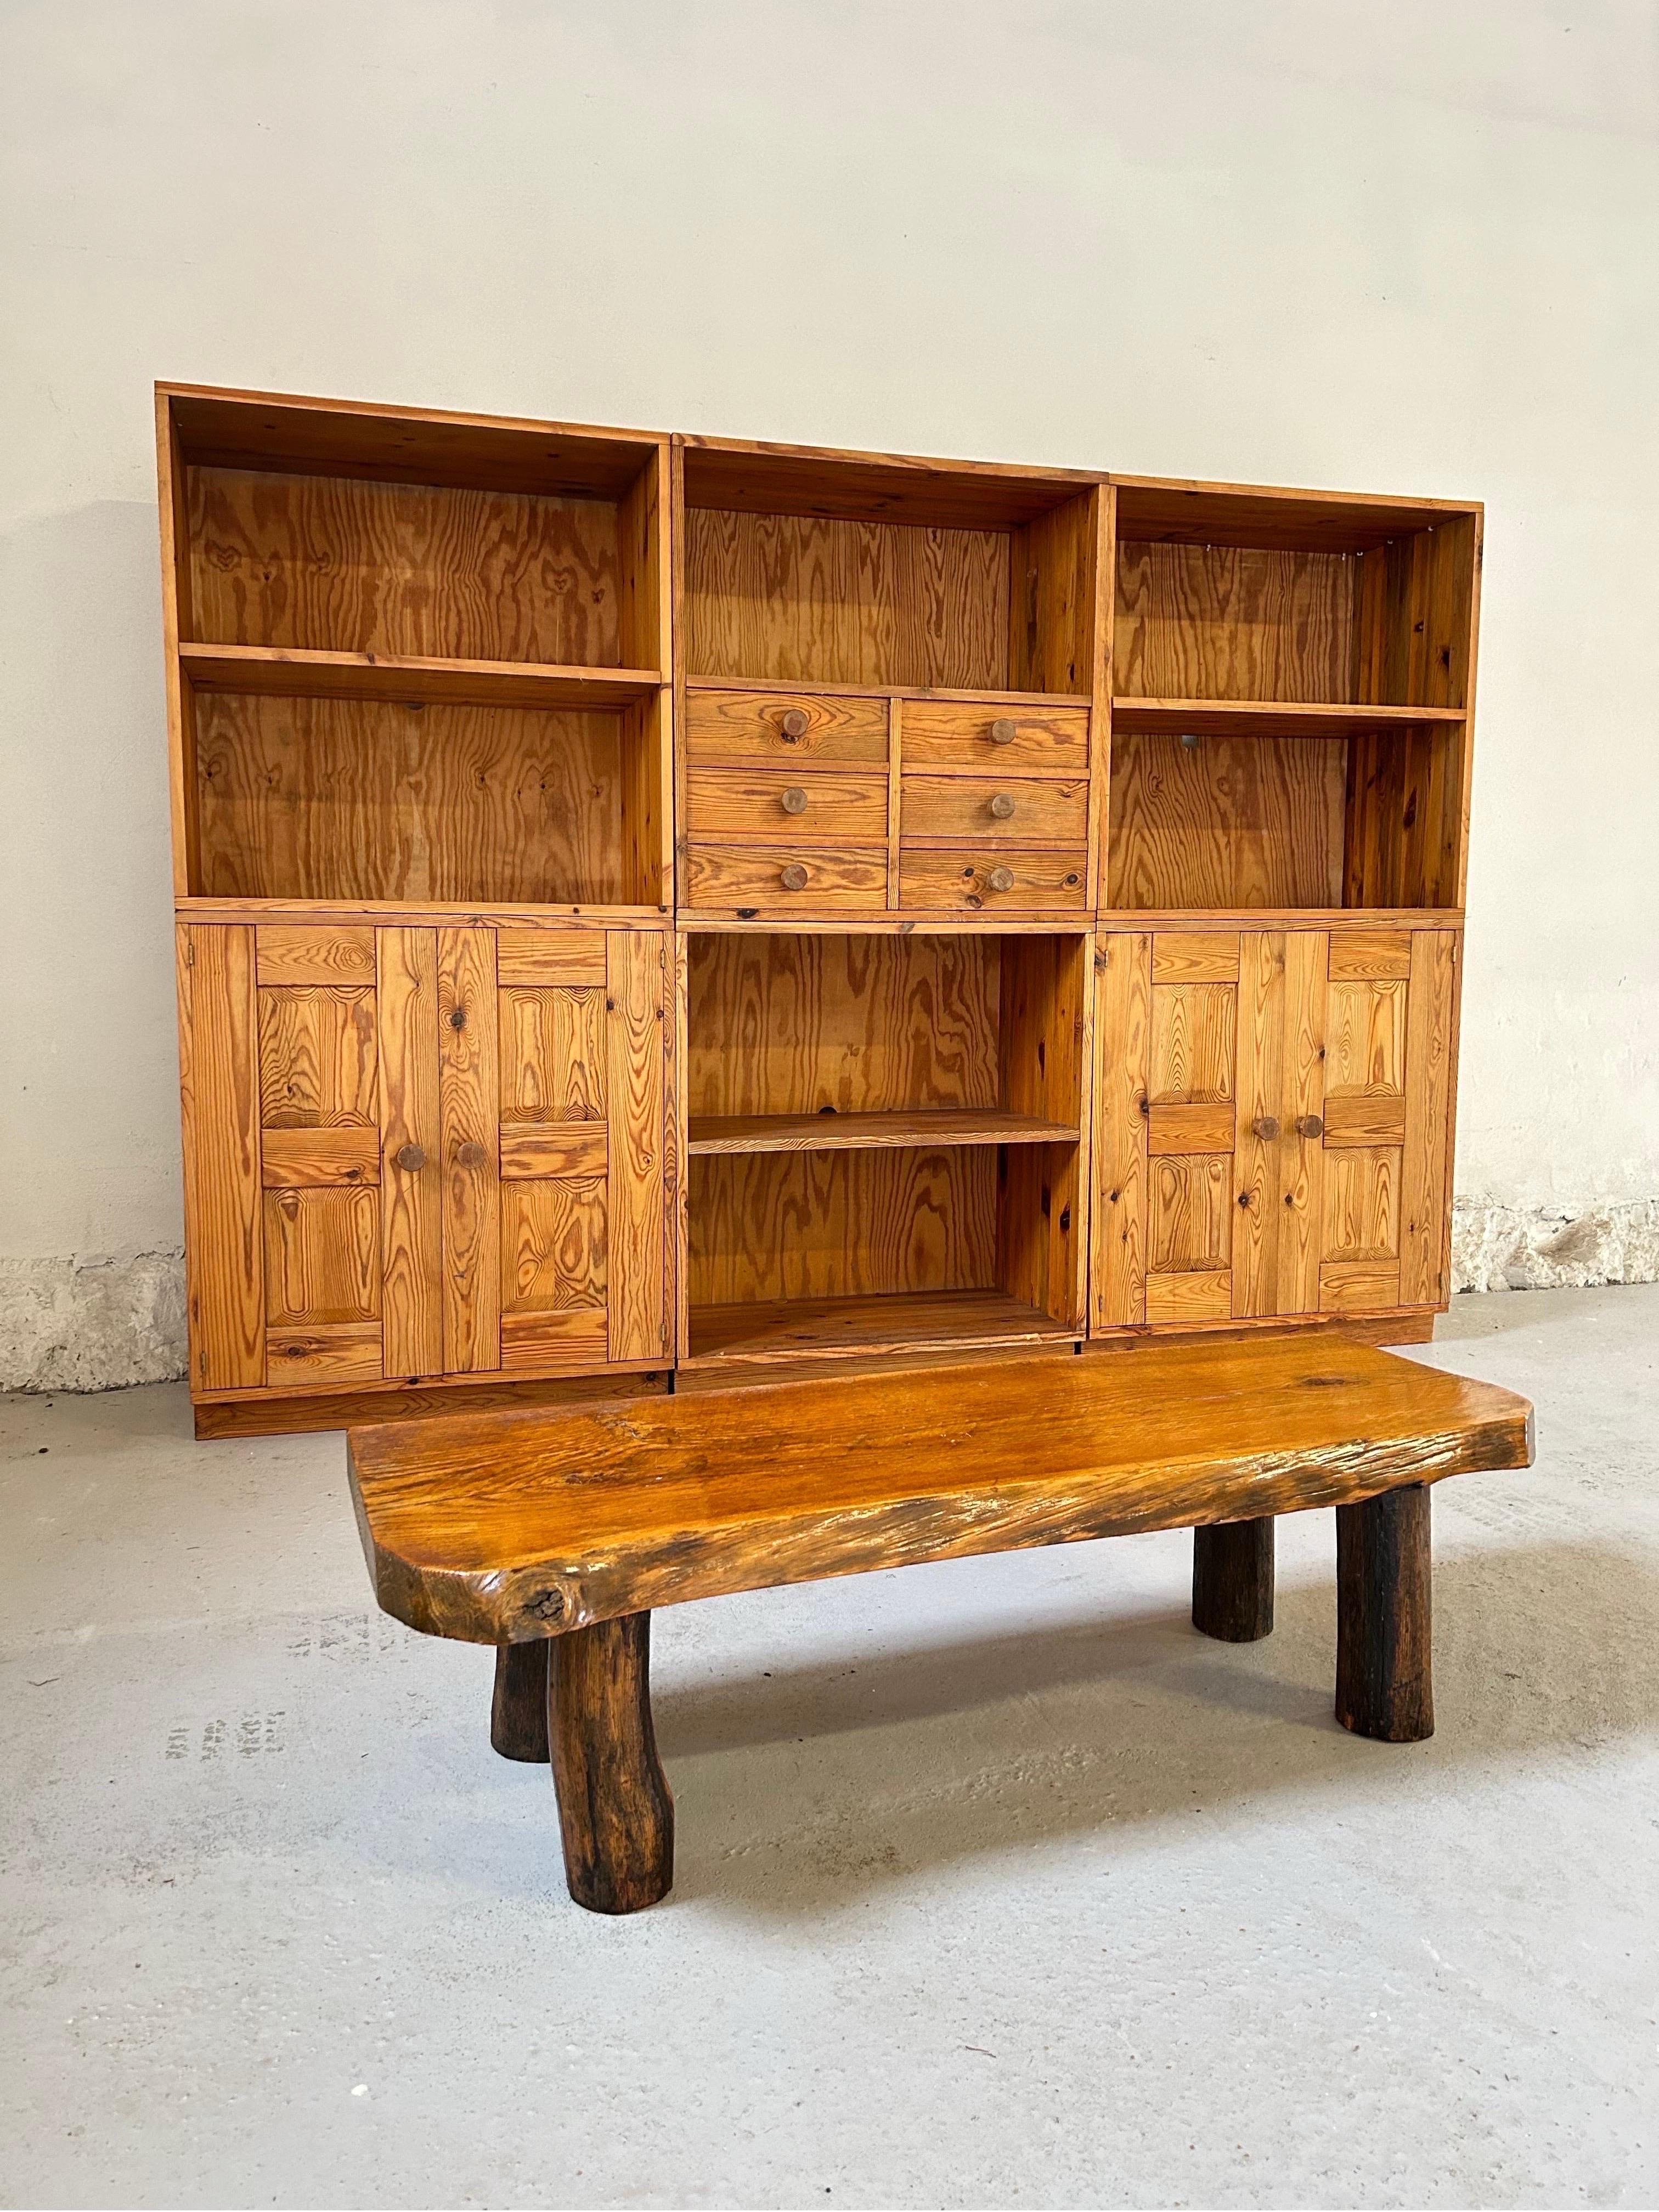 Hand-Crafted Decorative Solid Pine cabinets by Luxus, Sweden 1970’s For Sale